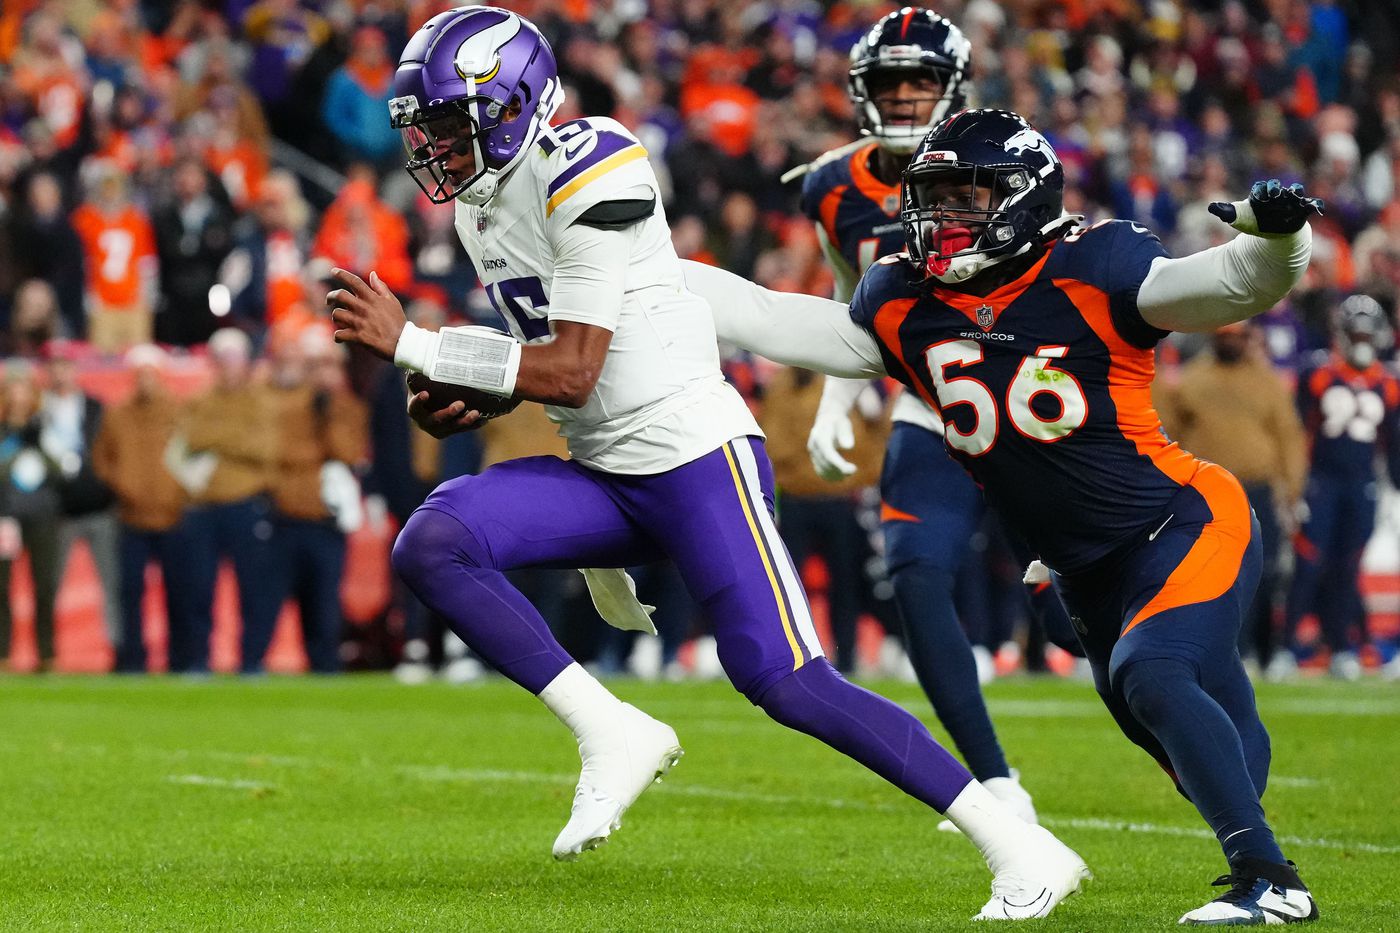 Chicago Bears at Minnesota Vikings: Fundamental info and first quarter dialogue